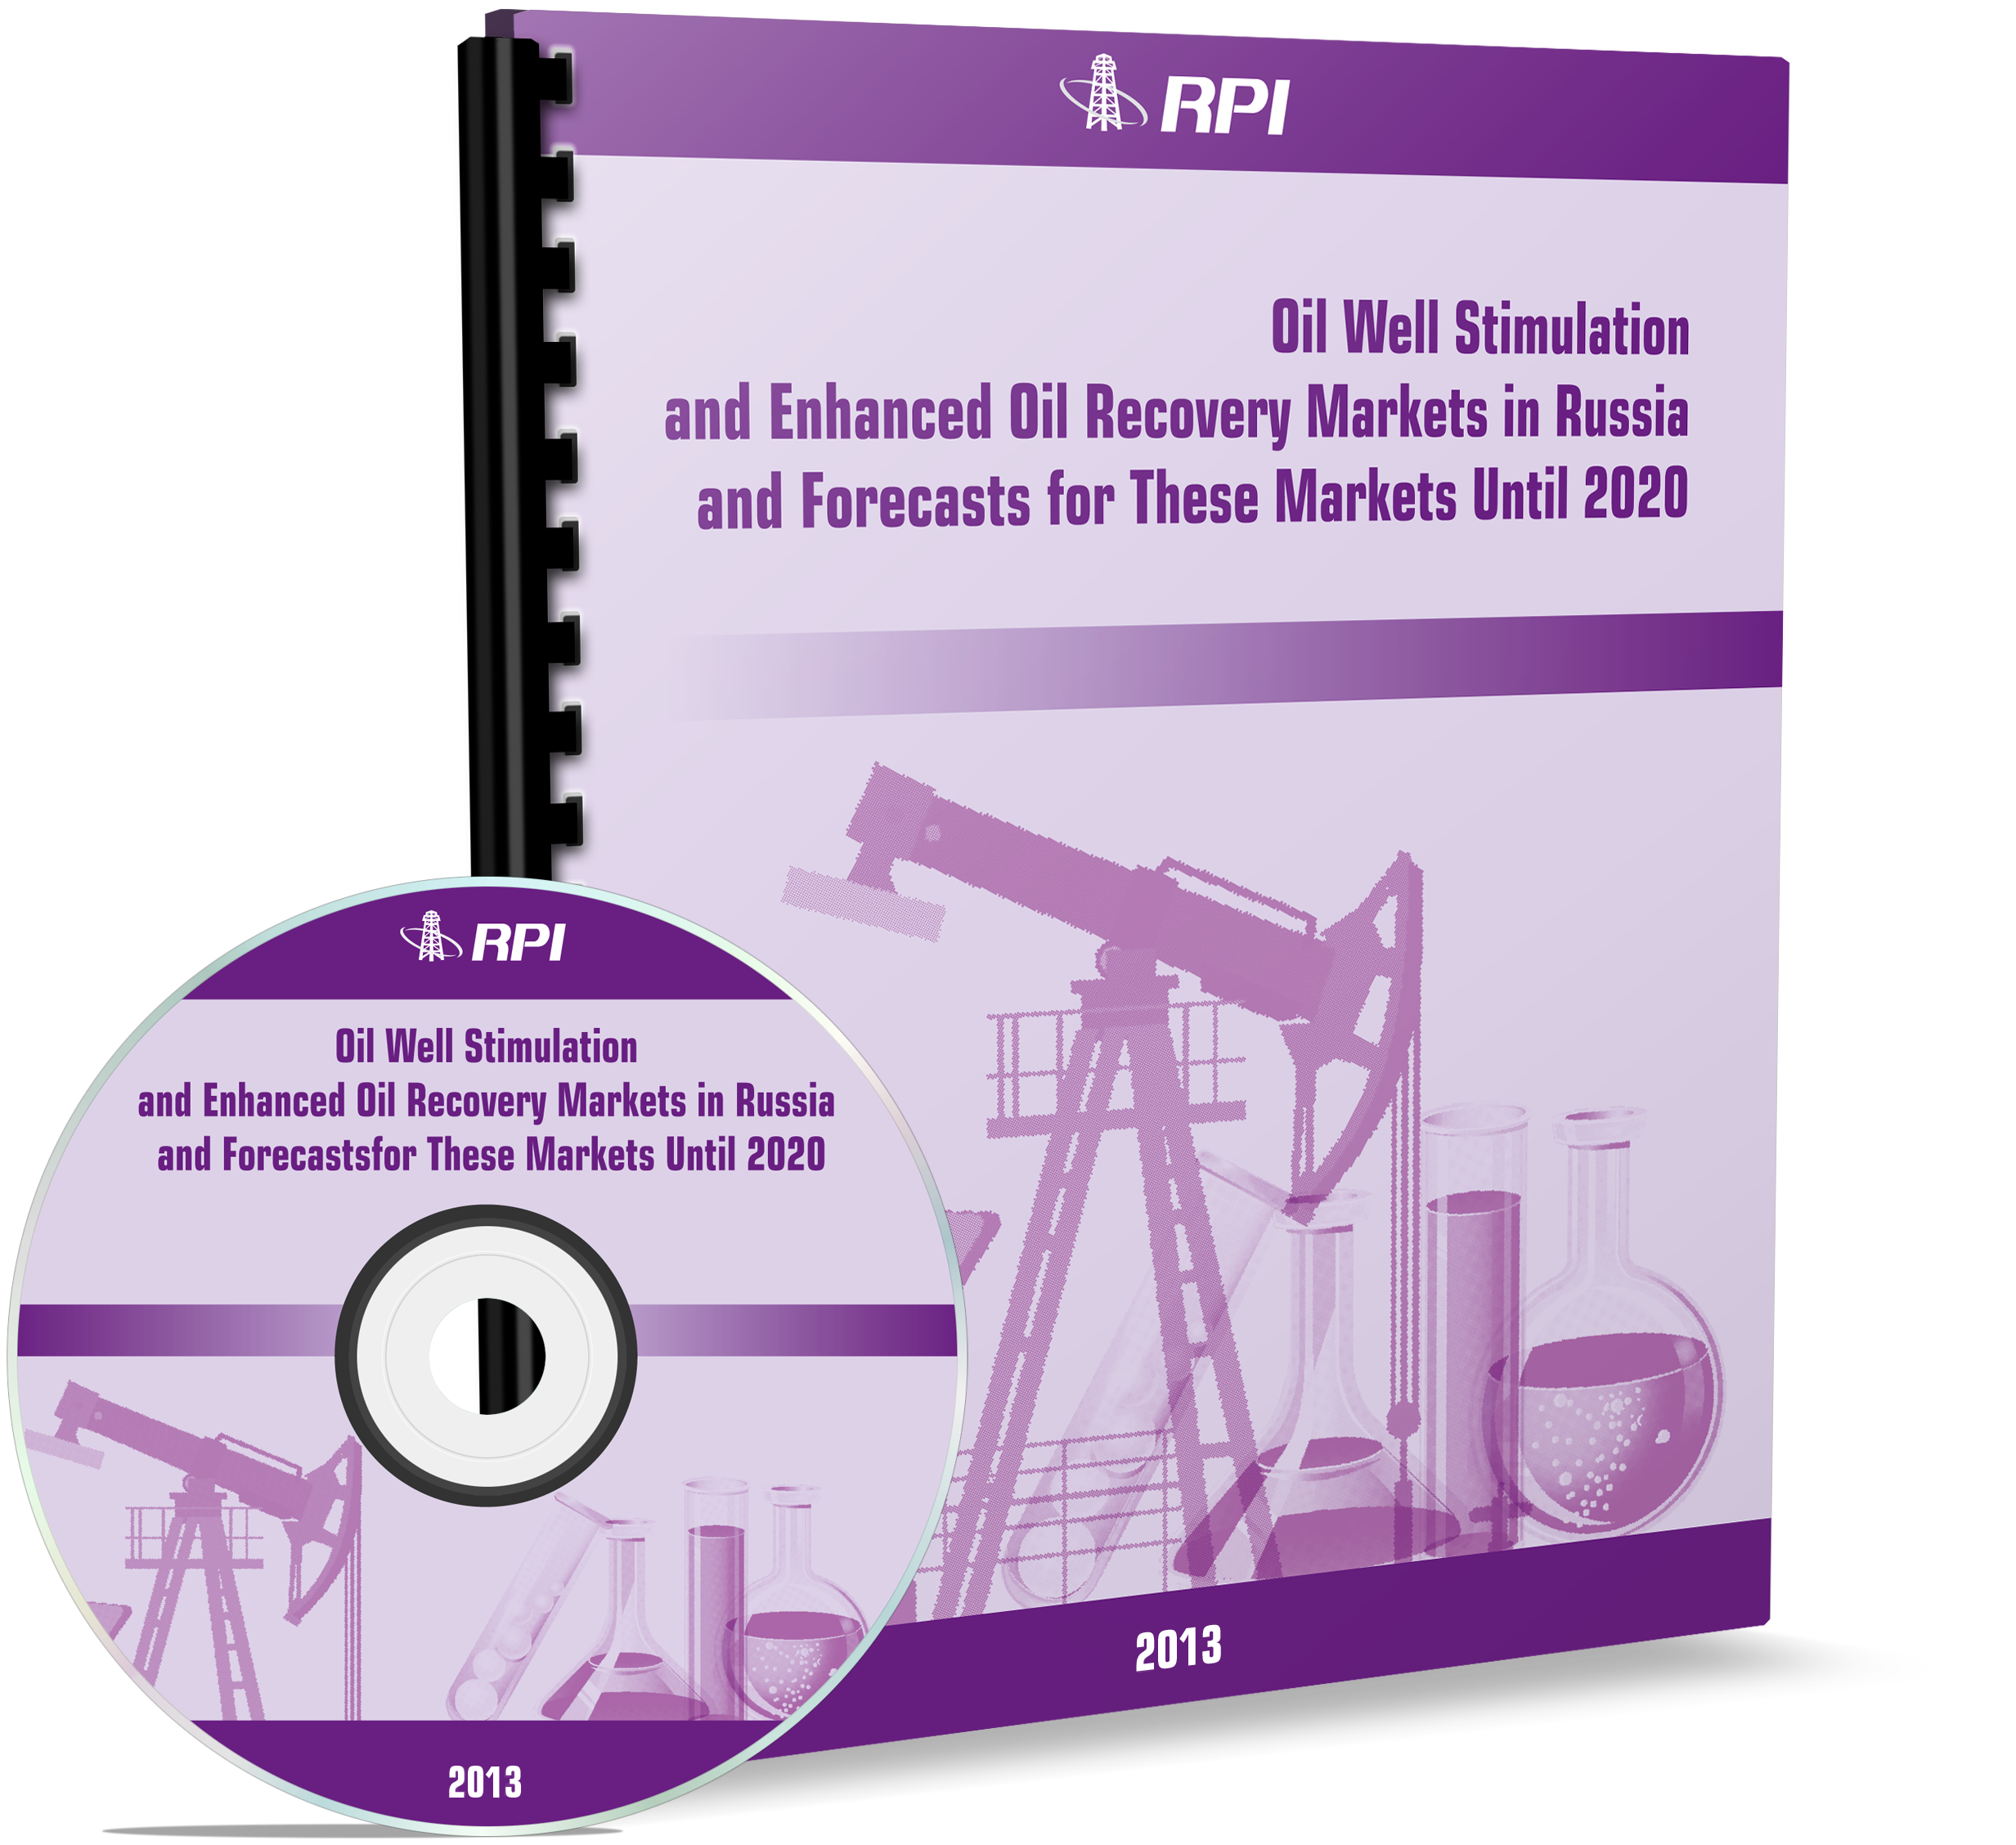 Oil Well Stimulation and Enhanced Oil Recovery Markets in Russia 2013 and Forecasts for These Markets Until 2020